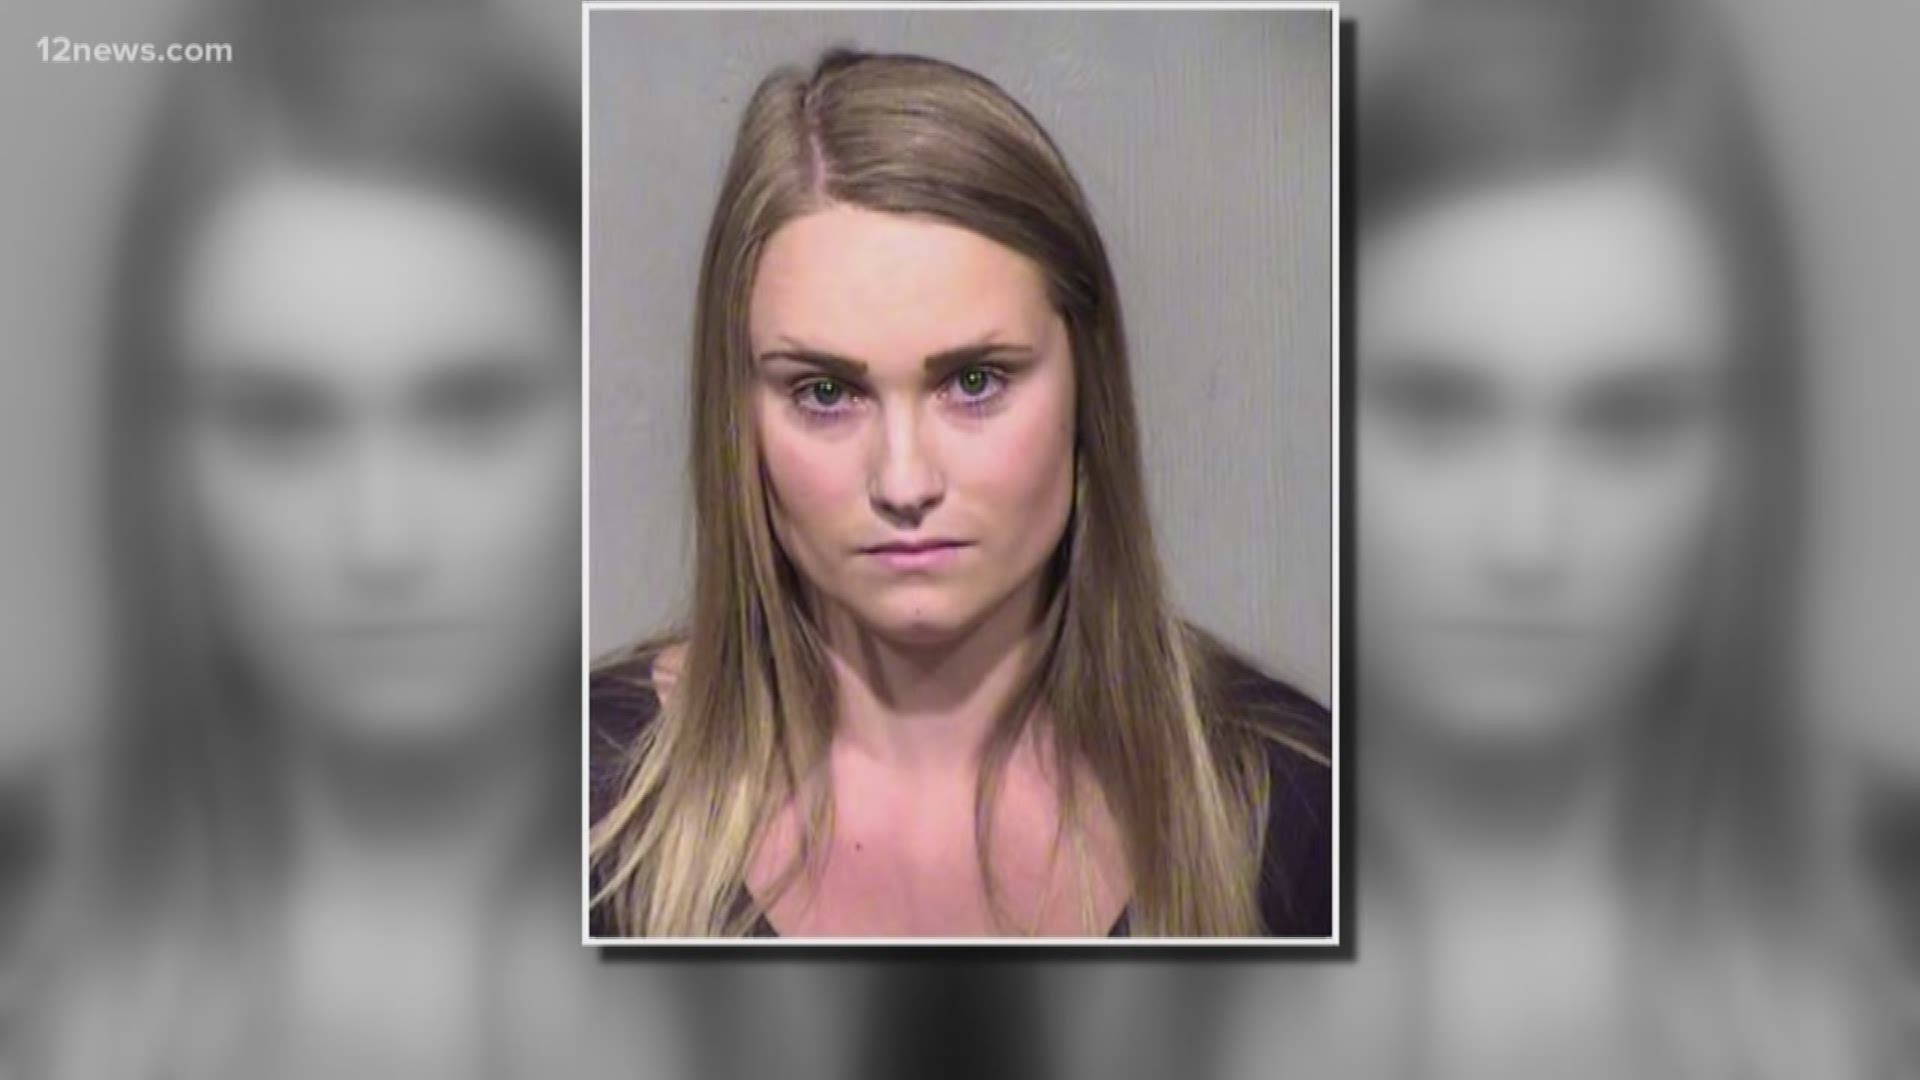 21-year-old Kassidy Woodworth is accused of stealing thousands of dollars of items from families she would nanny for. One of the victims of the alleged theft is speaking out.